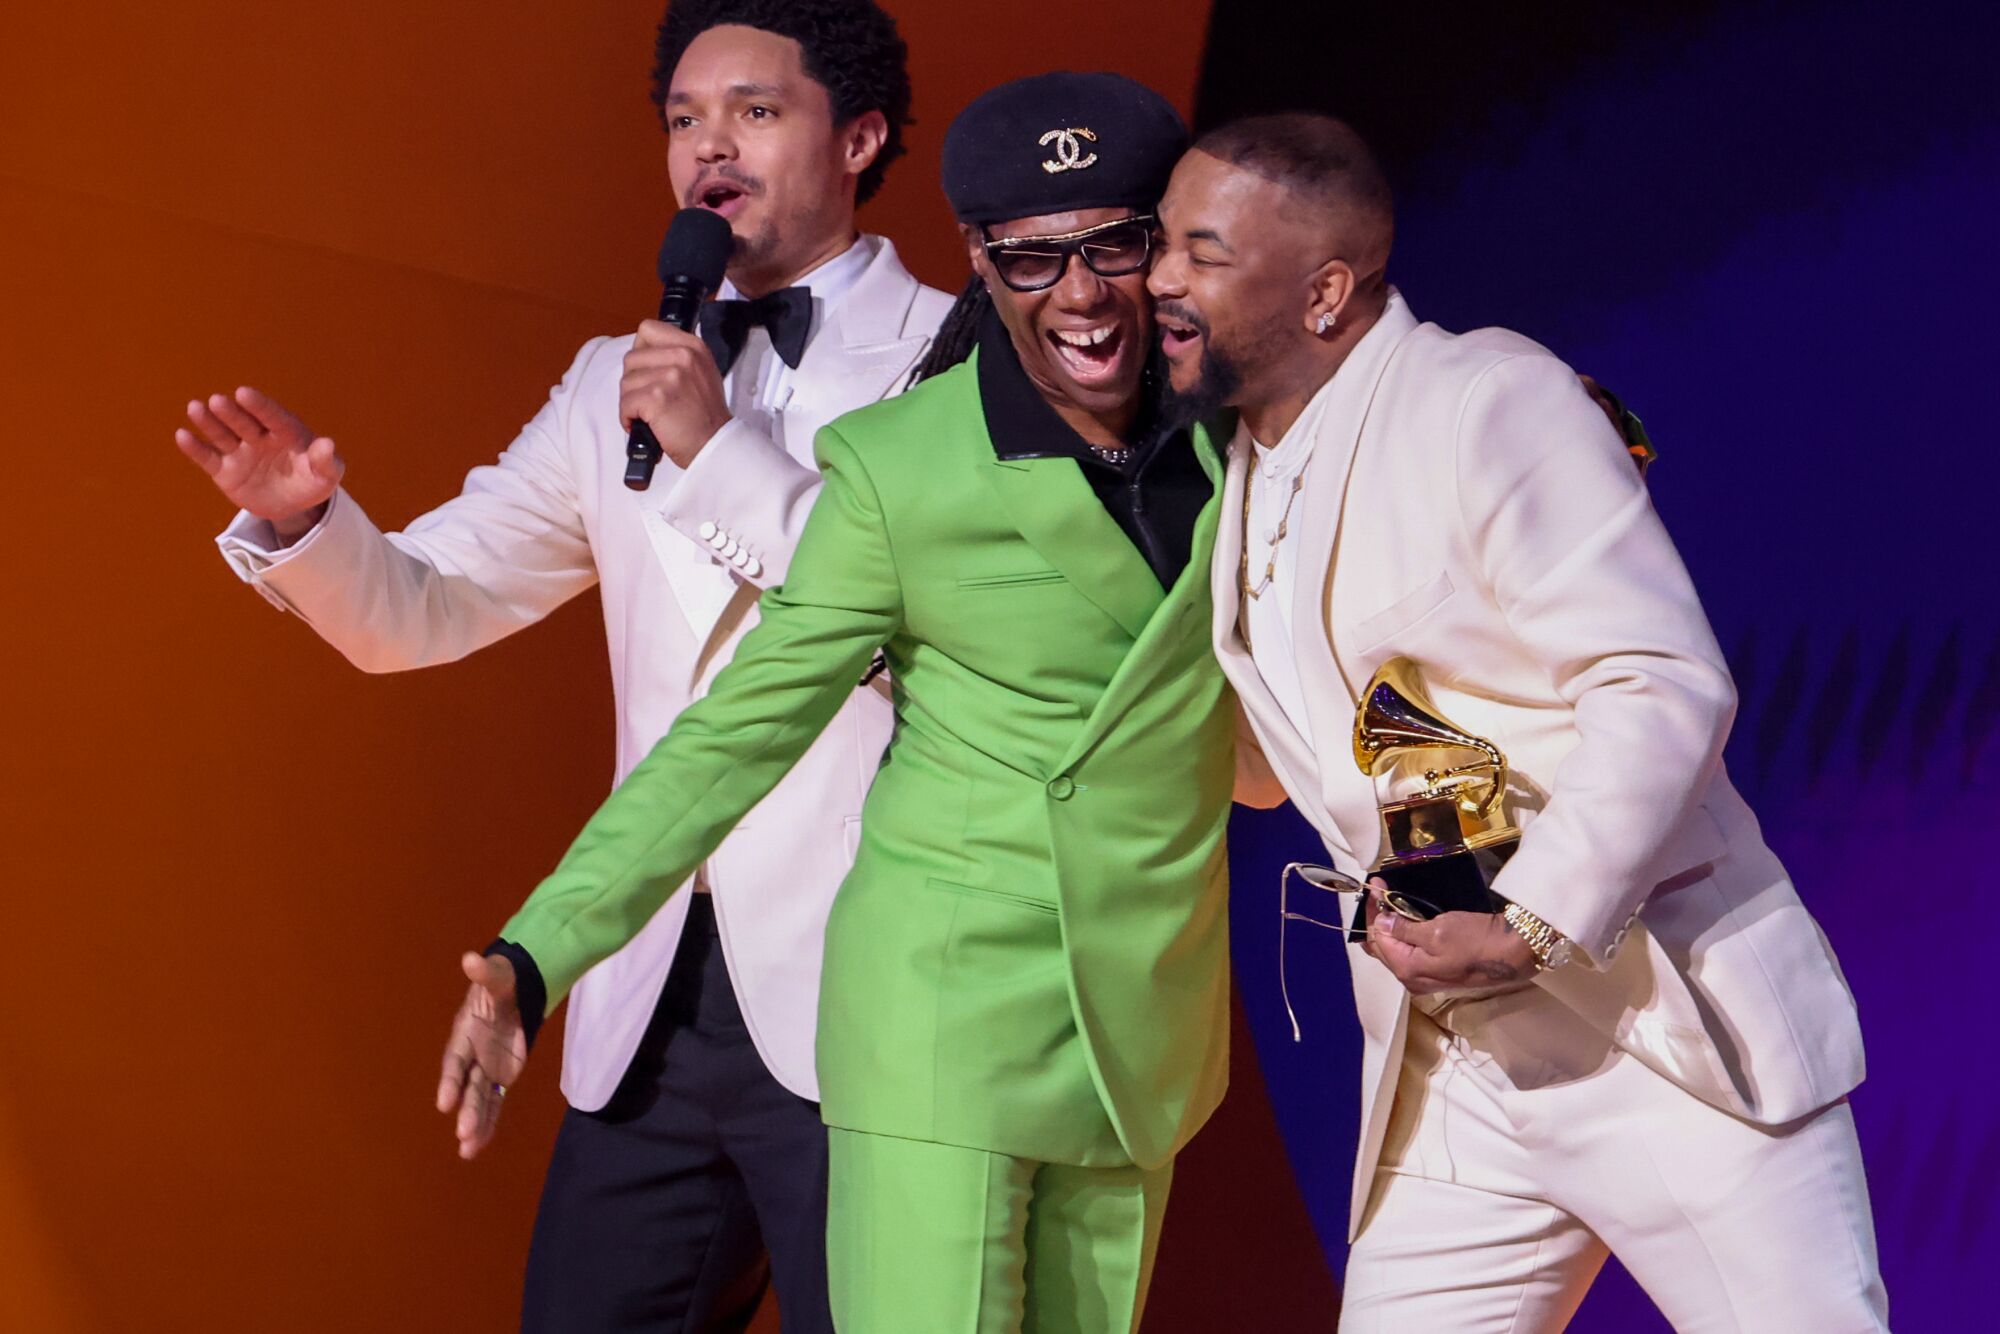 Nile Rodgers and Terius "The-Dream" Gesteelde-Diamant accept the award for R&B song at the 65th Grammy Awards.